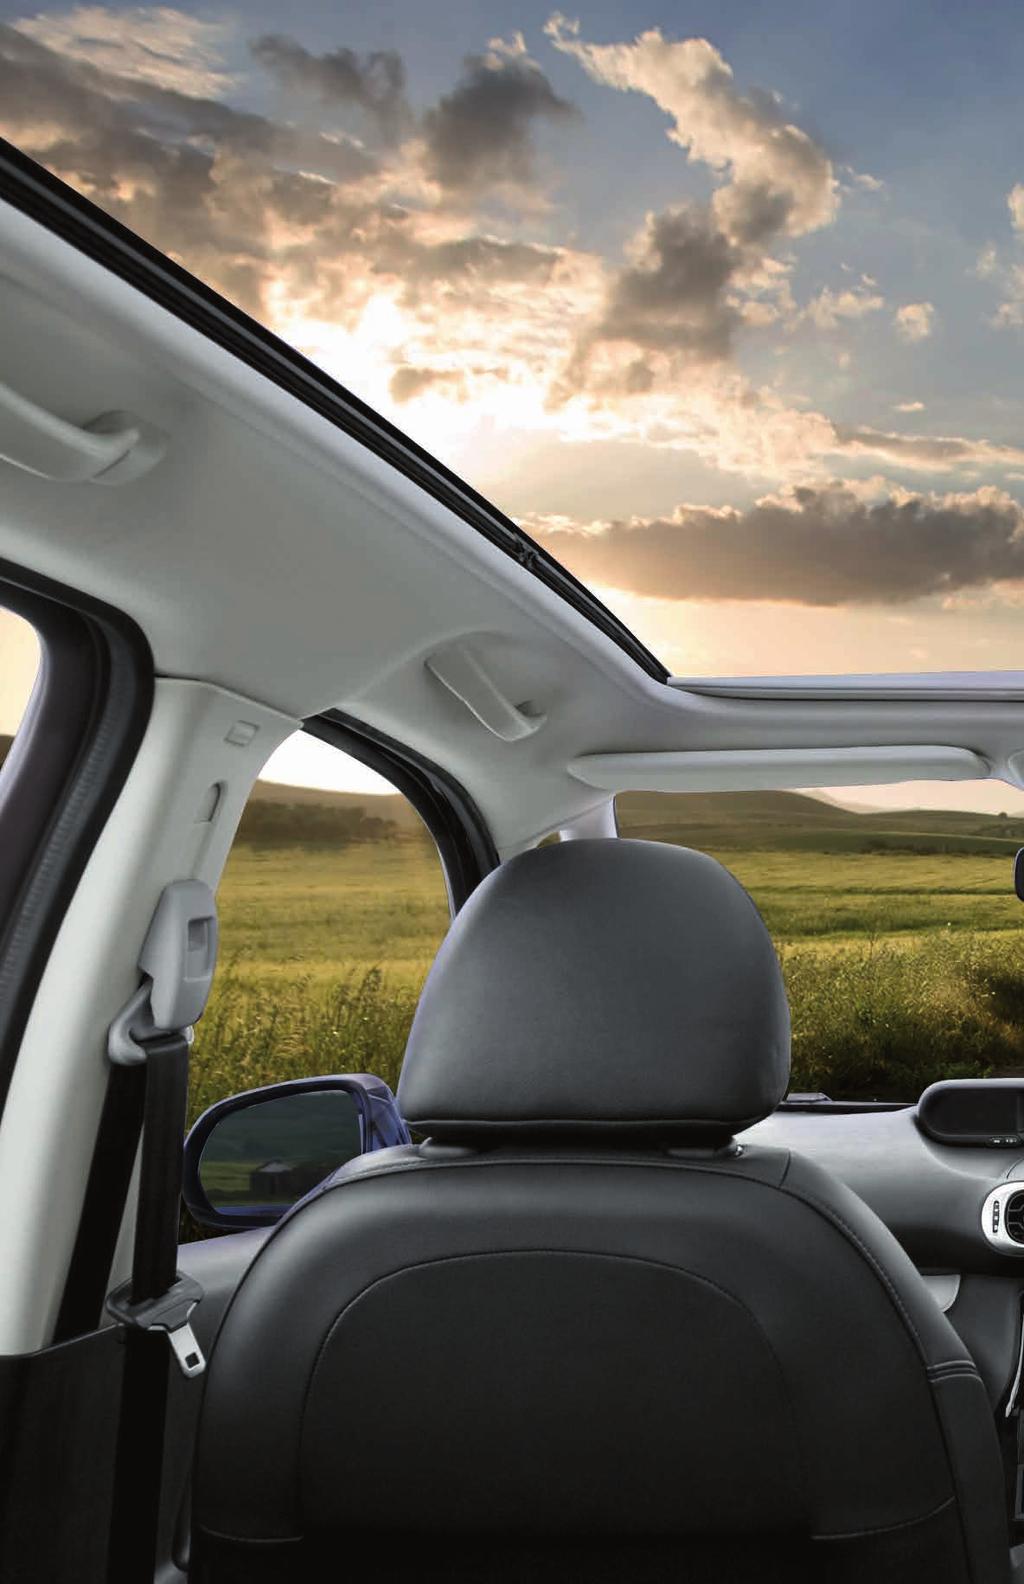 ROOM WITH A VIEW Citroën C3 Picasso is equipped to bring you the very best views all round.